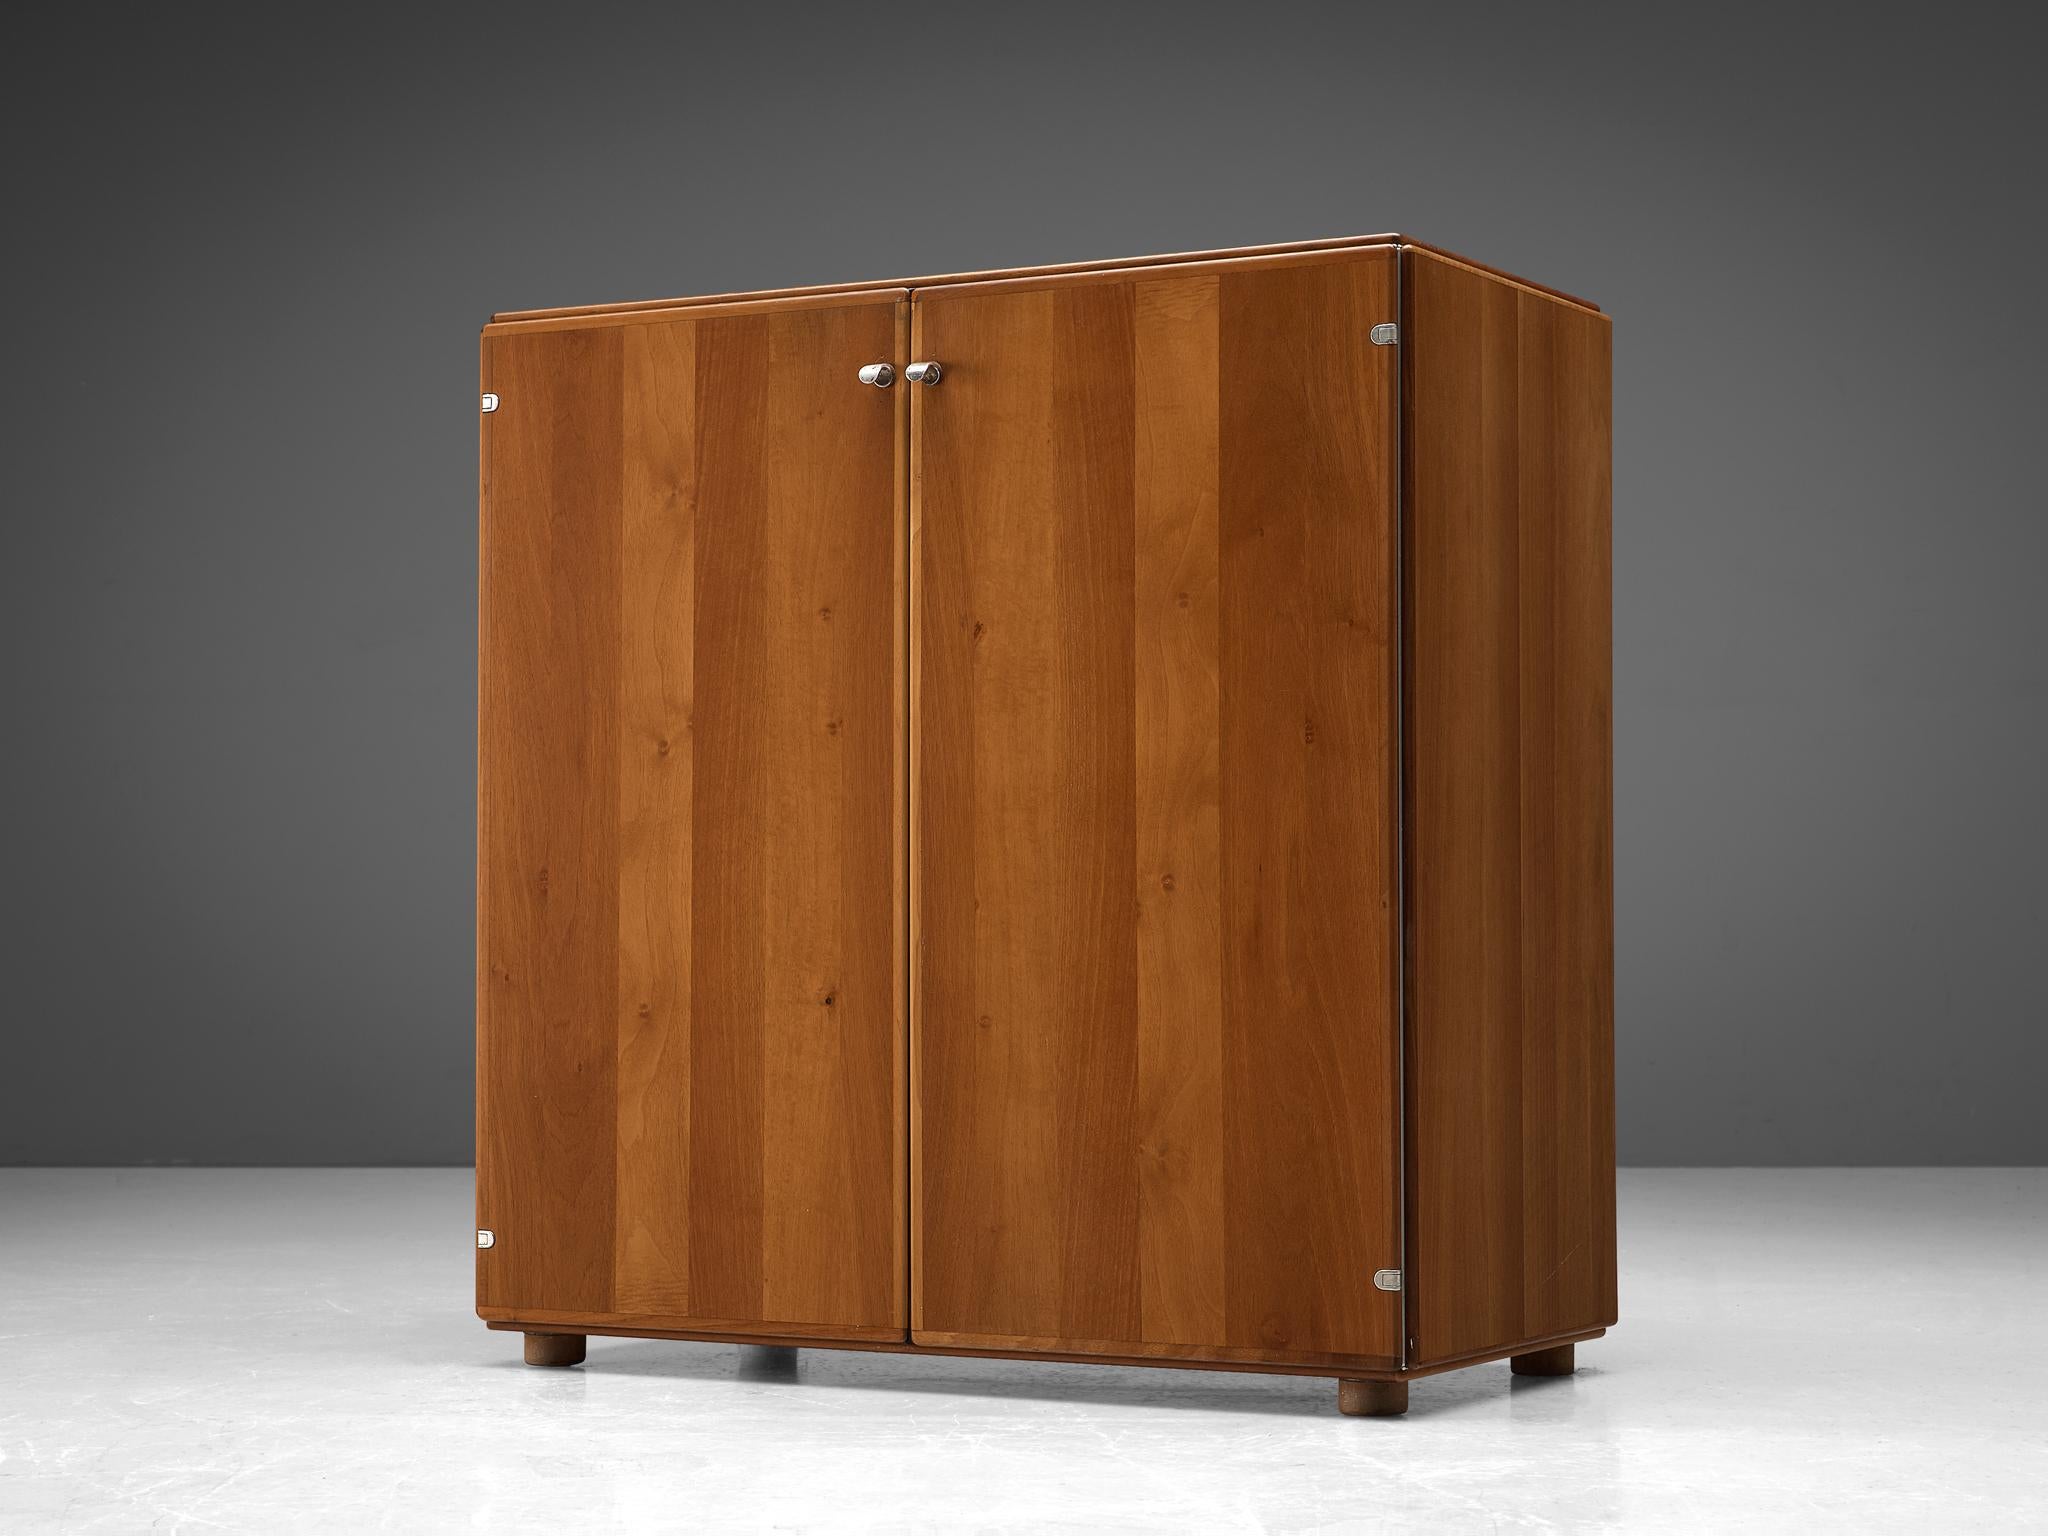 Tobia Scarpa, cabinet in walnut, Italy, 1960s

This cabinet was designed by Tobia Scarpa, and shows a clear design that characterizes the work of Scarpa. 
The piece shows wonderful subtle details, such as the rounded door edges and hinges that